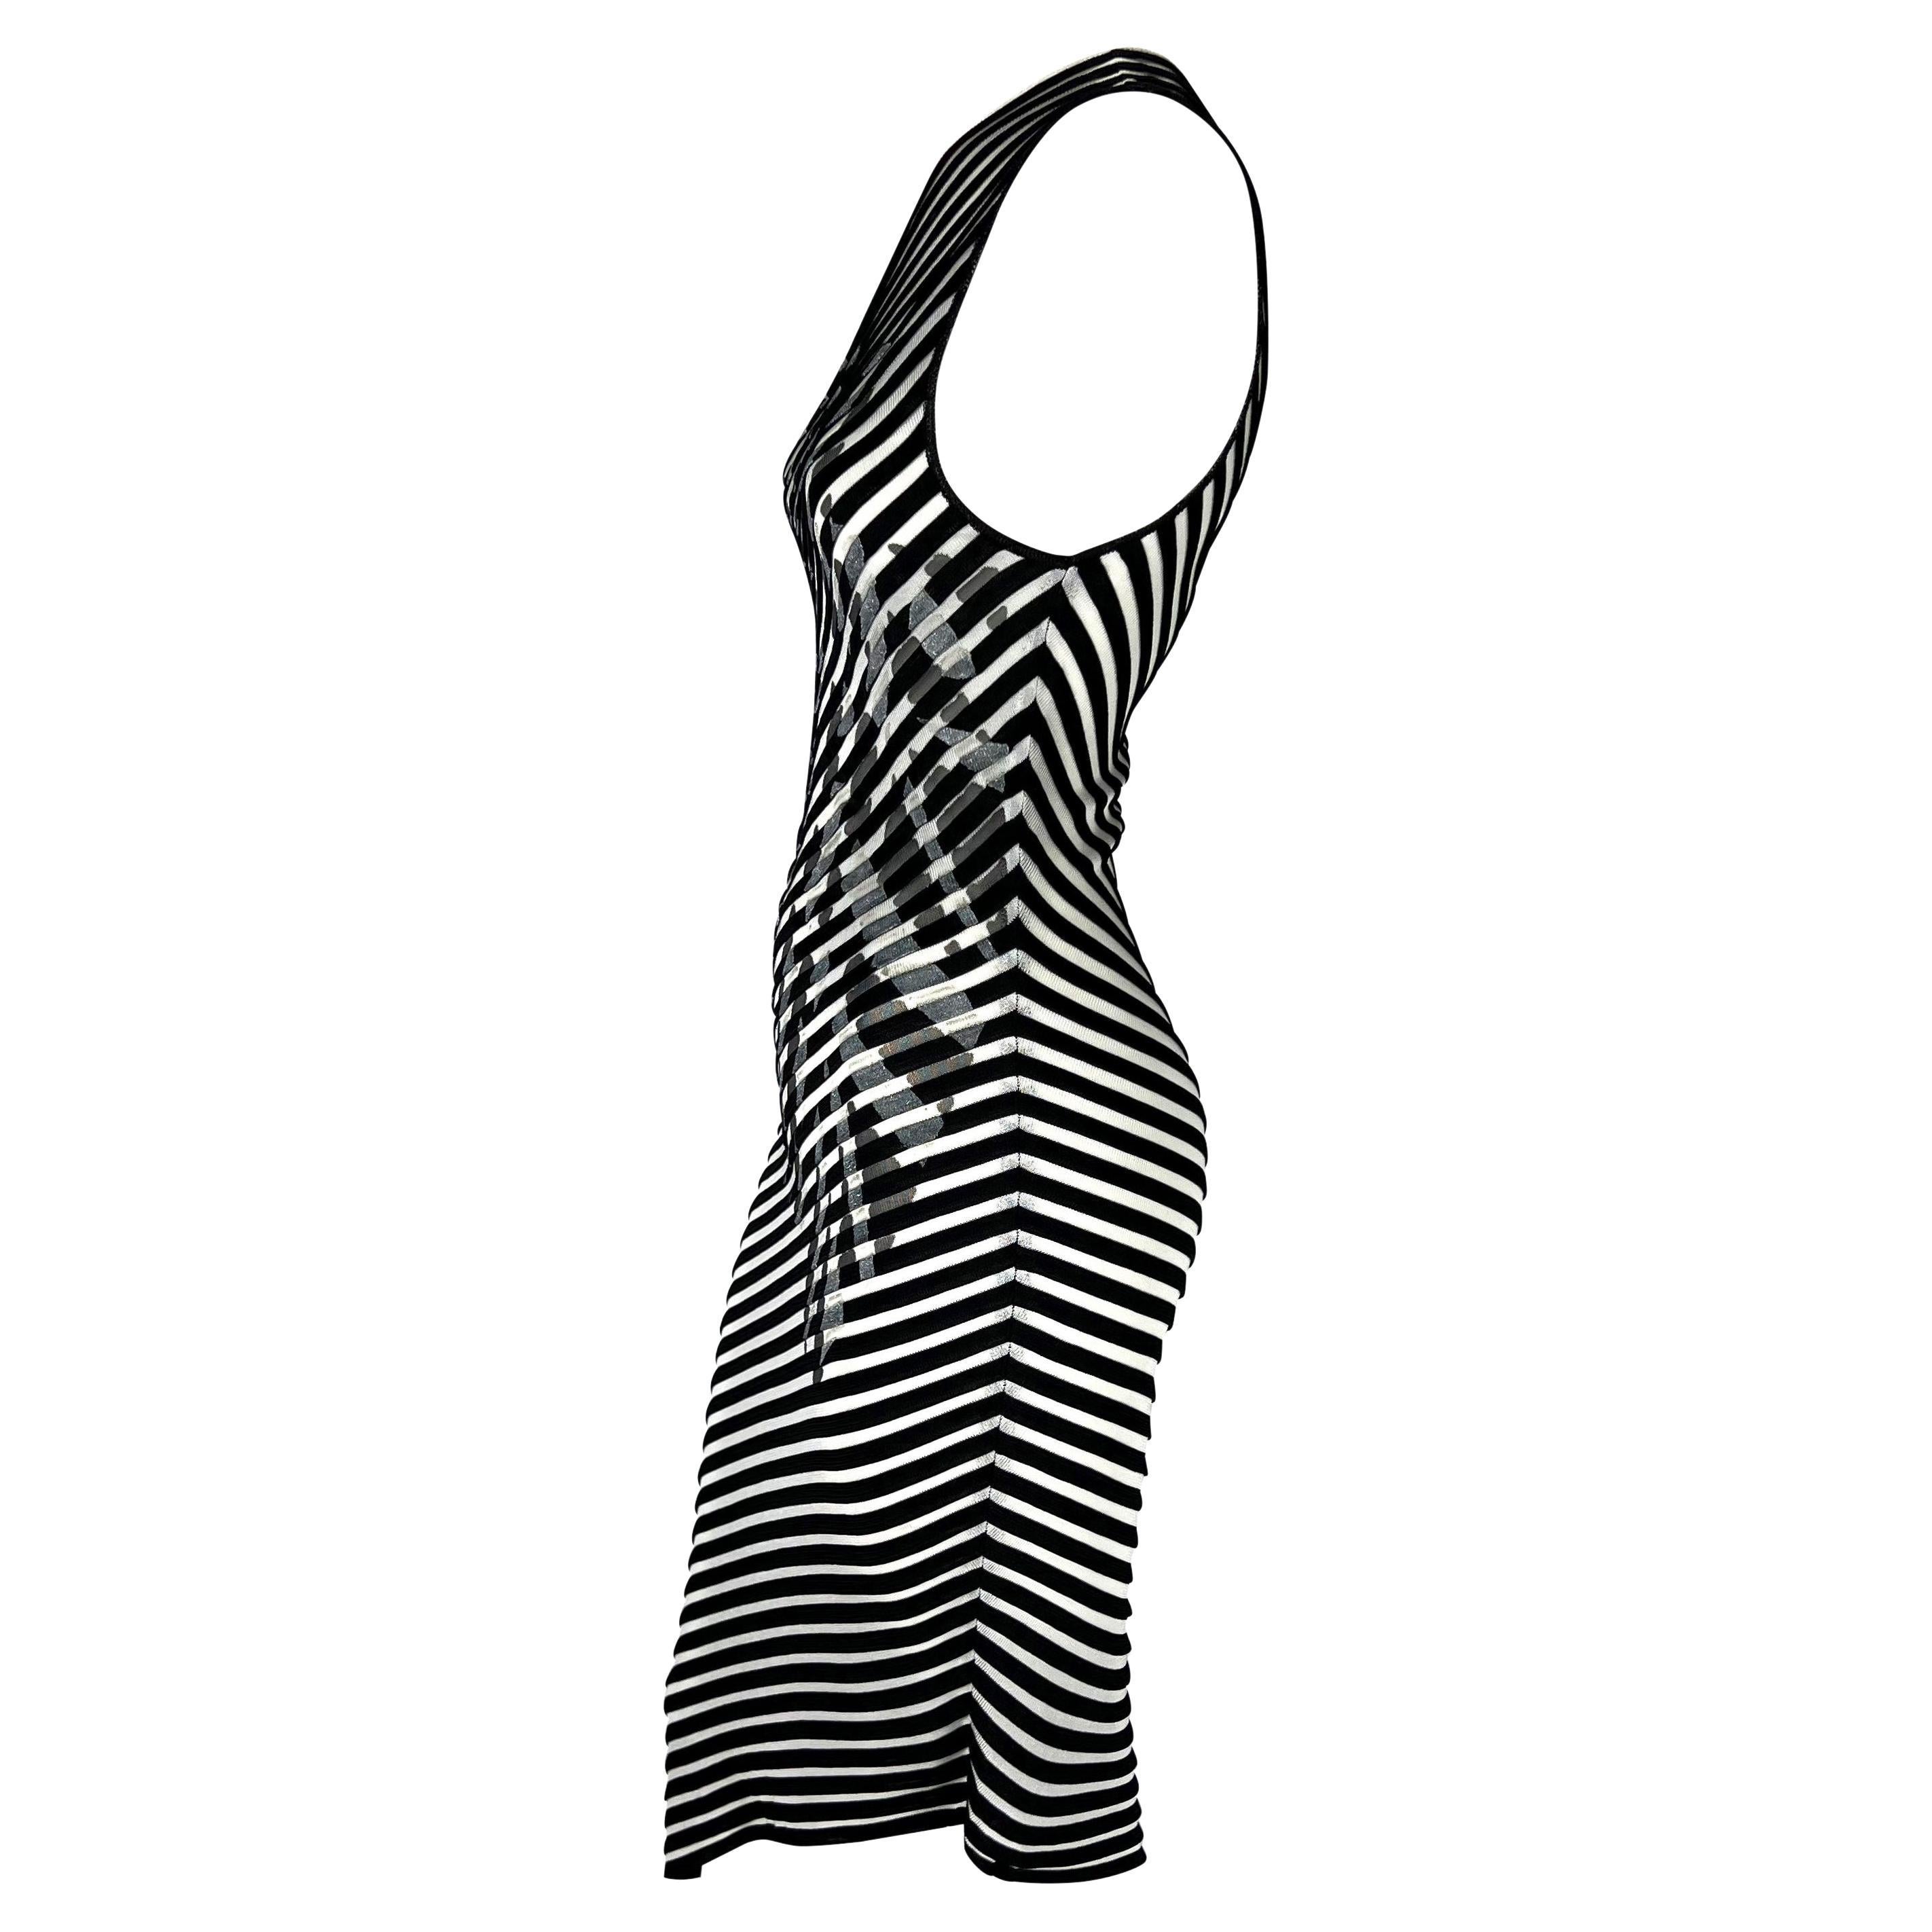 Presenting a fabulous black and white sheer striped Thierry Mugler knit dress. From the early 2000s, this fabulous dress features asymmetrical stripes as well as an asymmetrical neckline and hem. The dress is made complete with a silver metallic